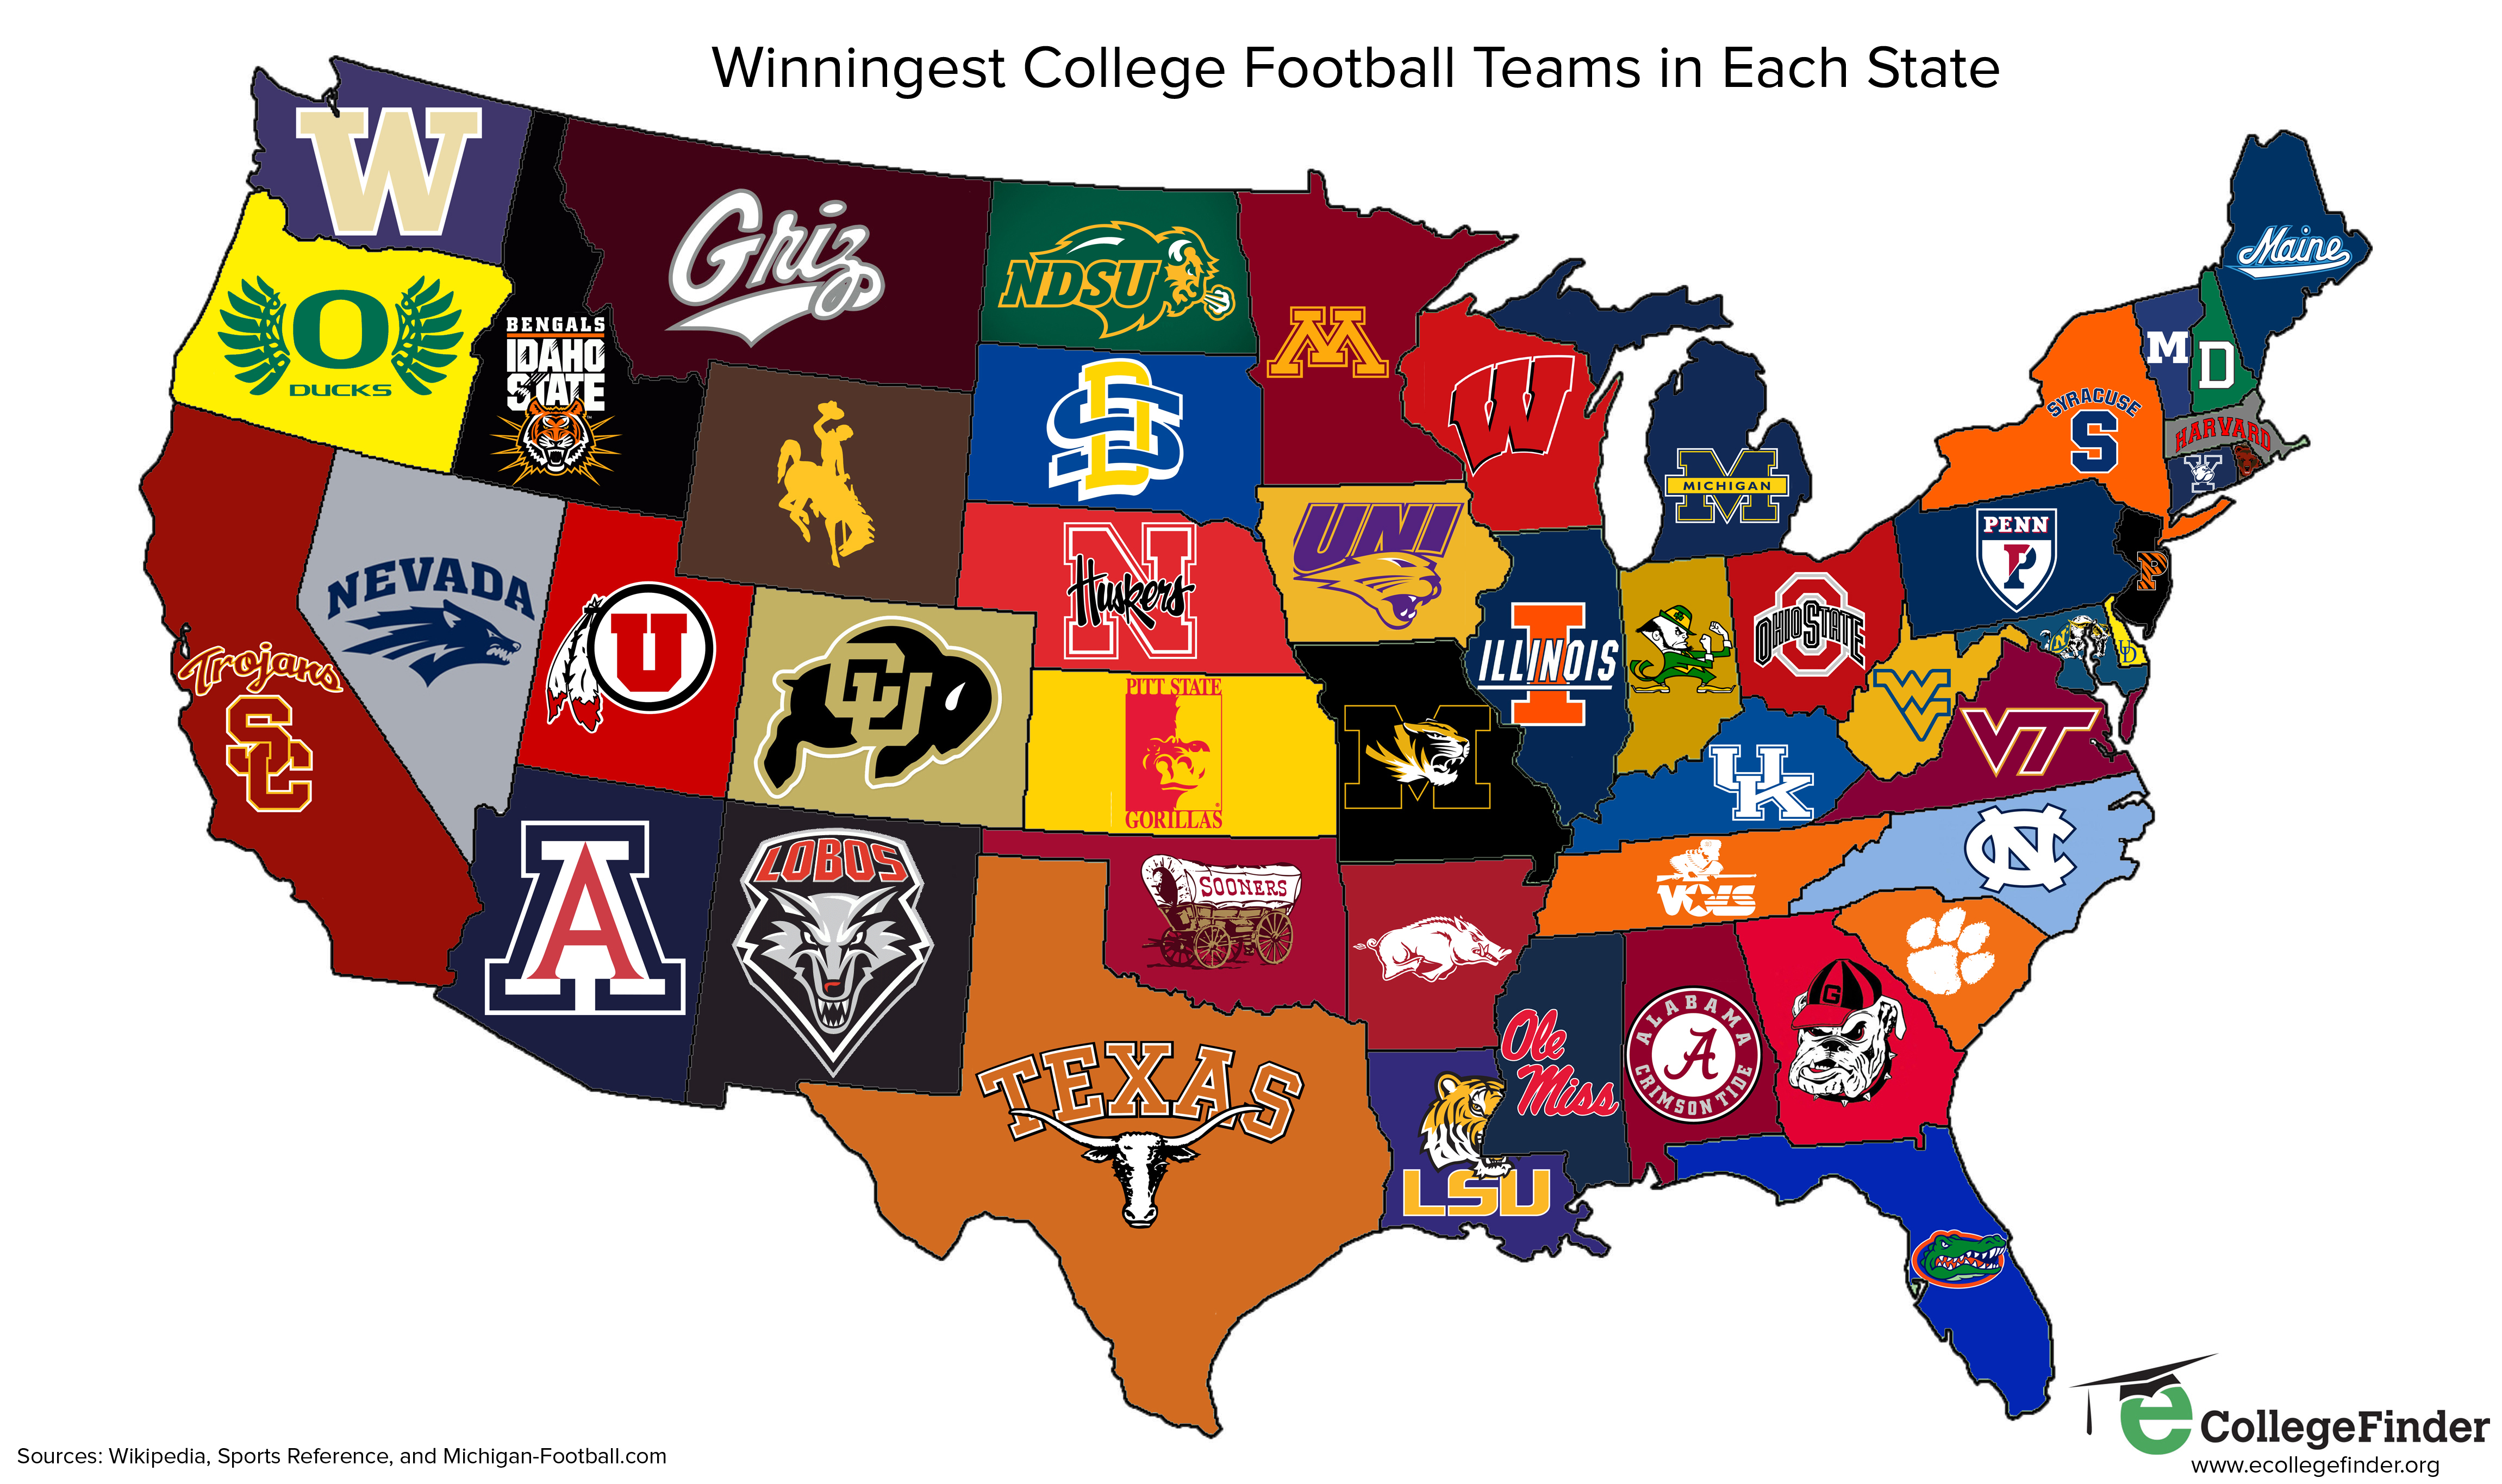 MAP The Winningest College Football Team in Each State